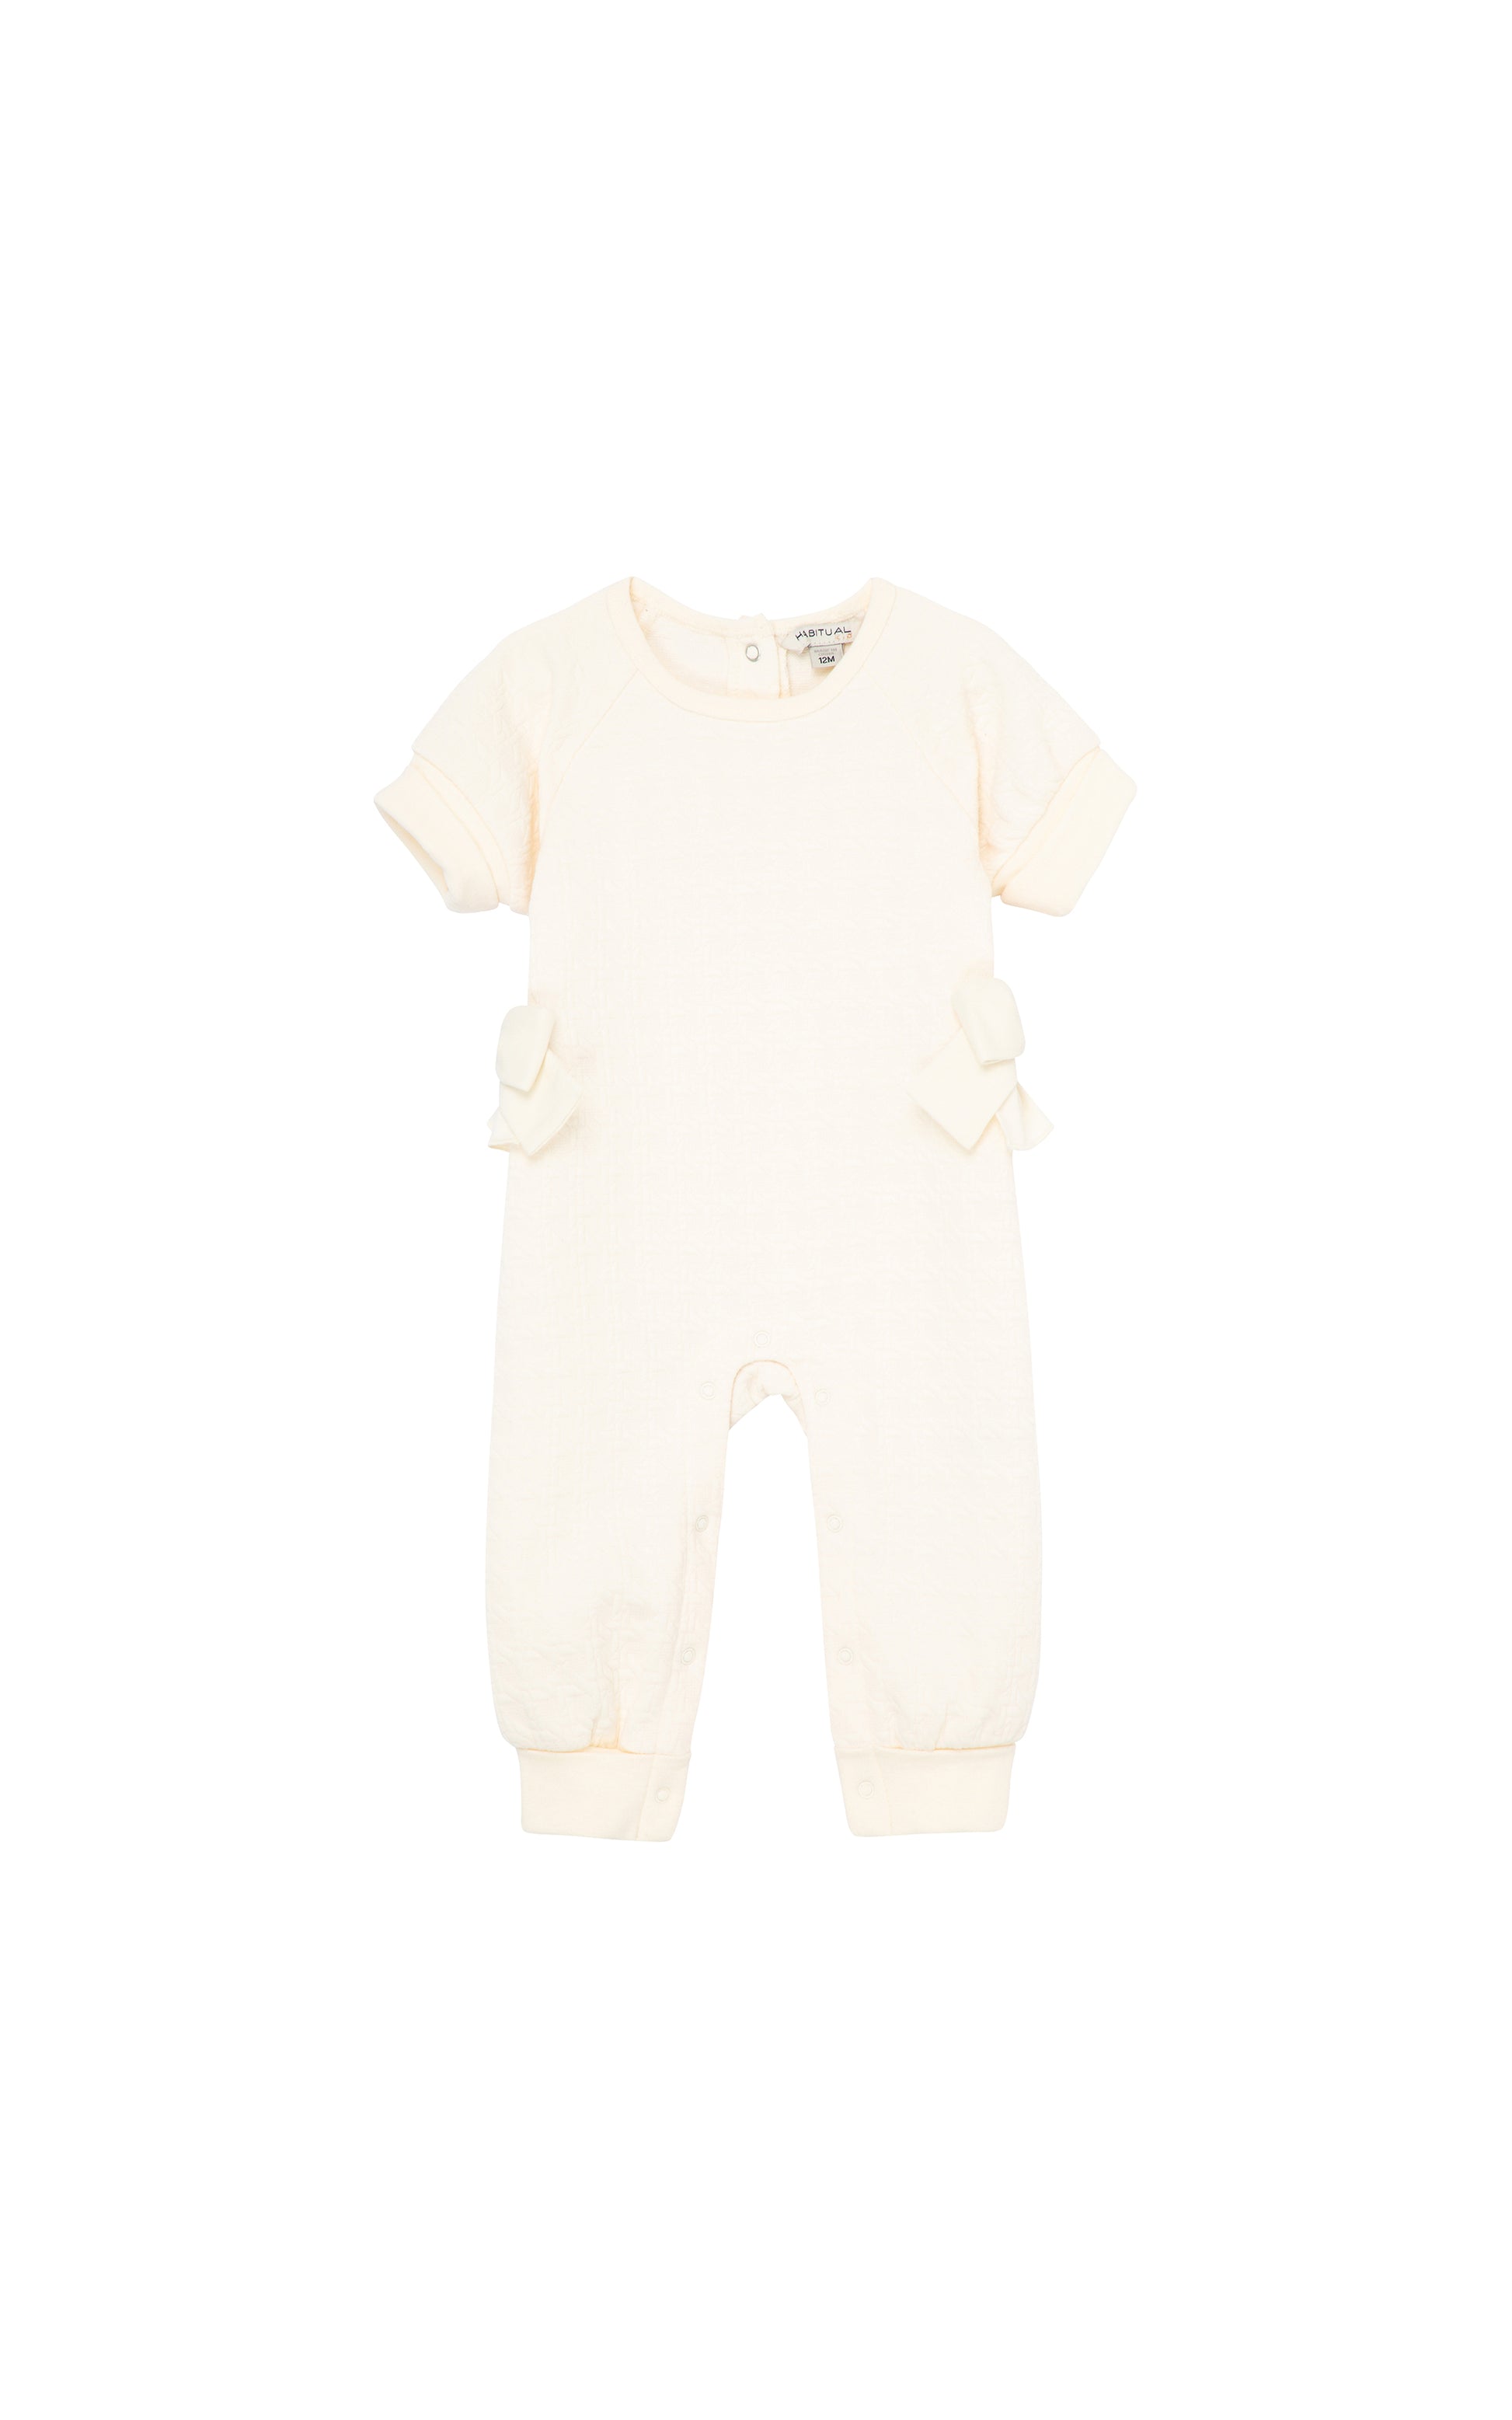 Off-white double knit coverall with cuffed short sleeves, cuffed ankles, and medium-sized bows on sides 